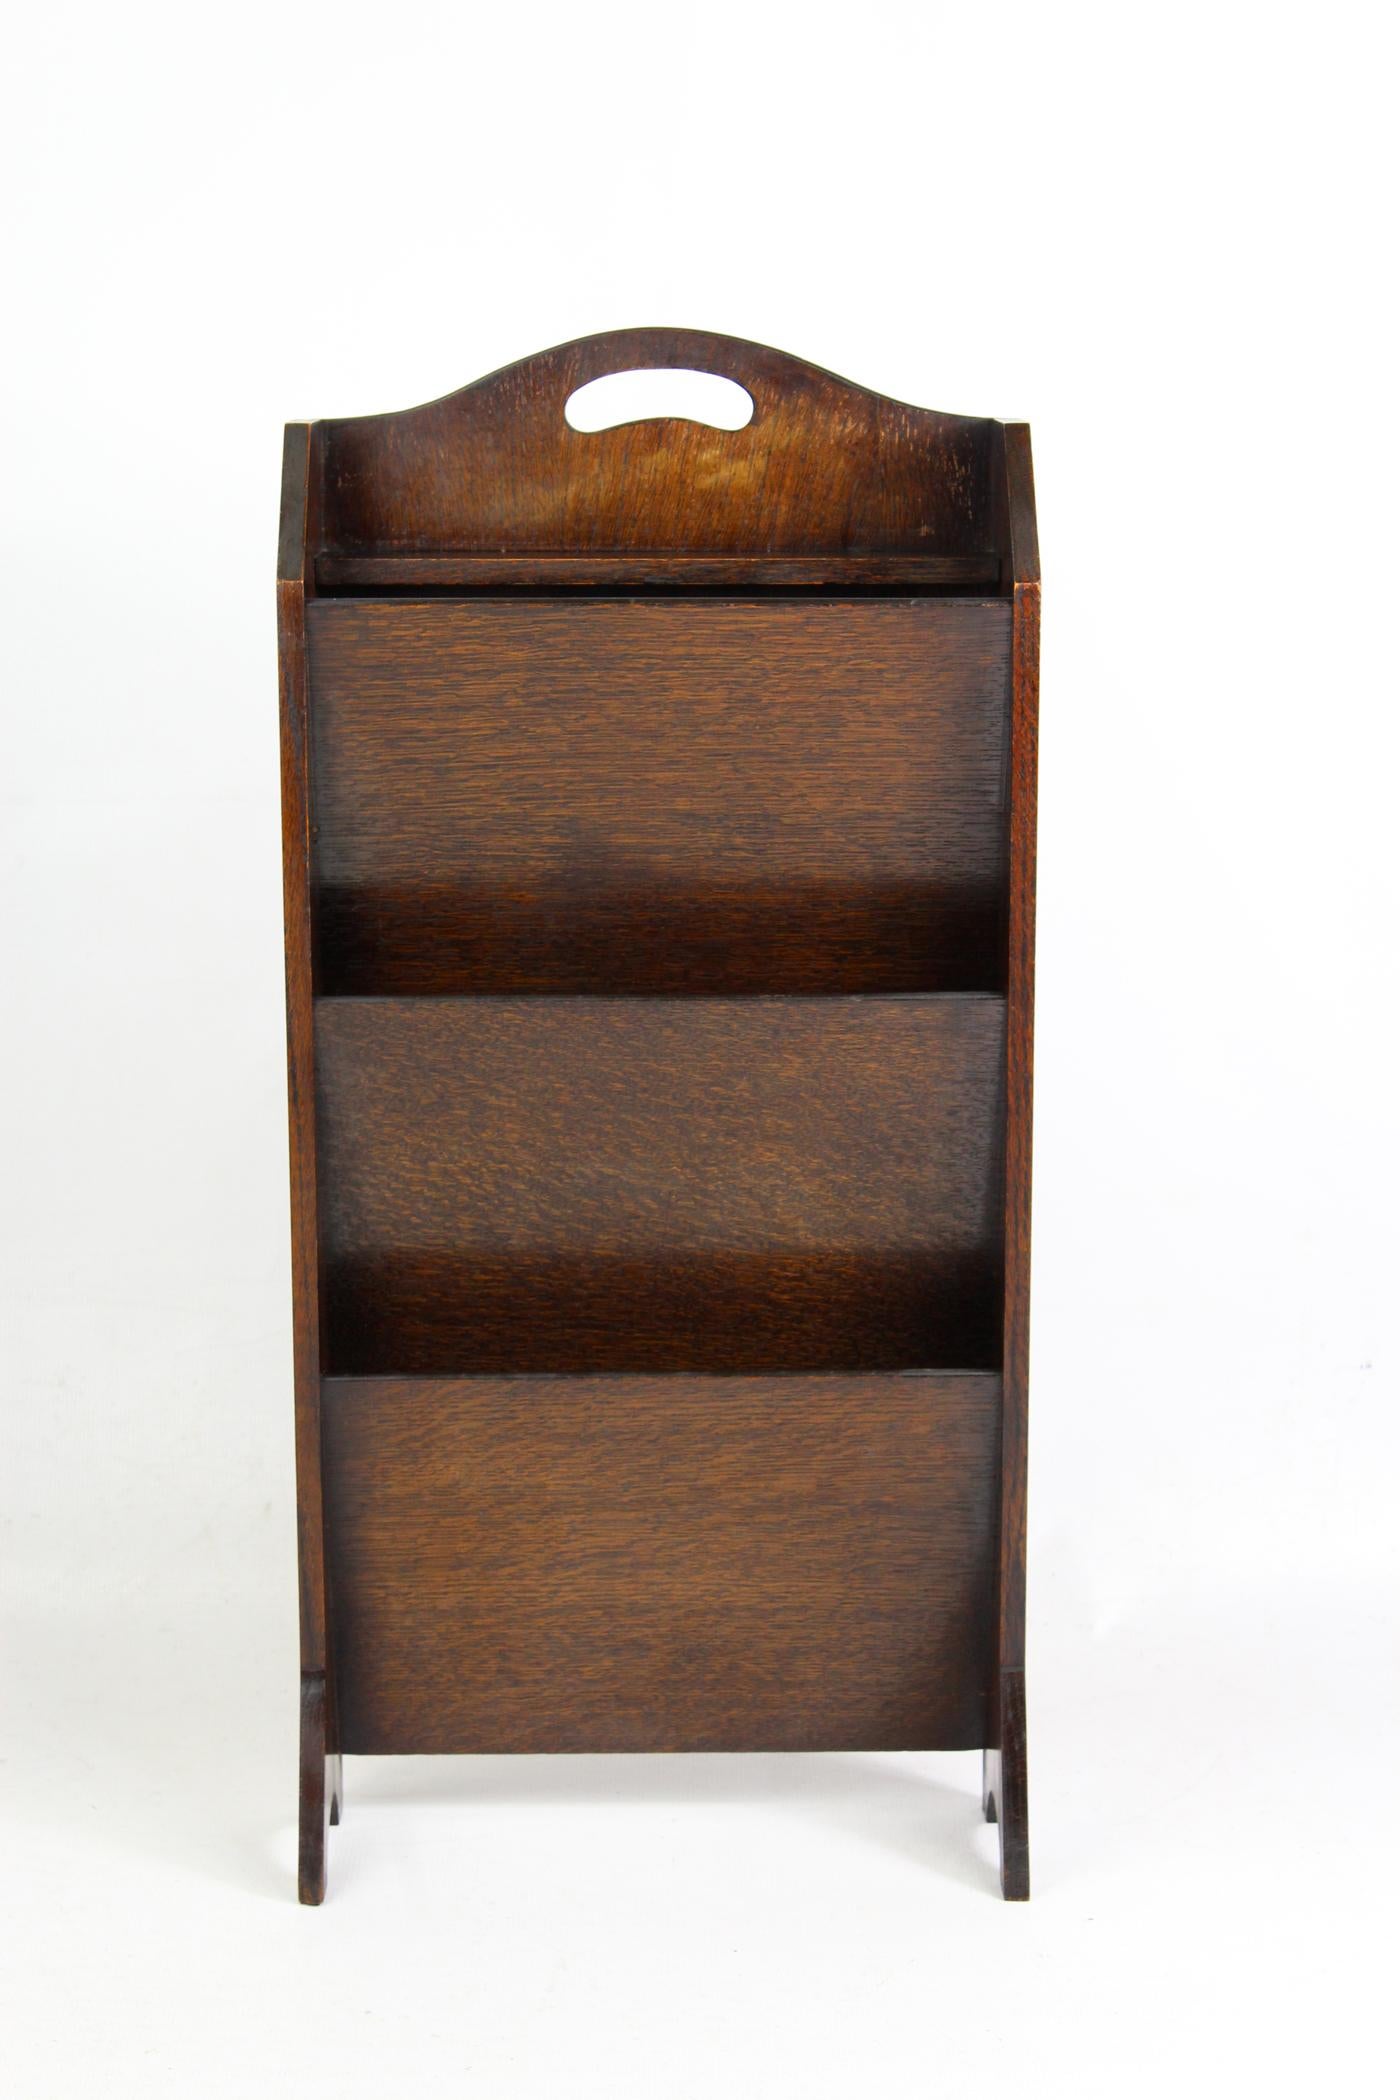 A charming small Art Deco oak newspaper or magazine stand dating from circa 1920s. With 3 angled book shelves for holding magazines or newspapers and a small shelf to the top. It has canted sides and a pierced carry handle to the top and stands on